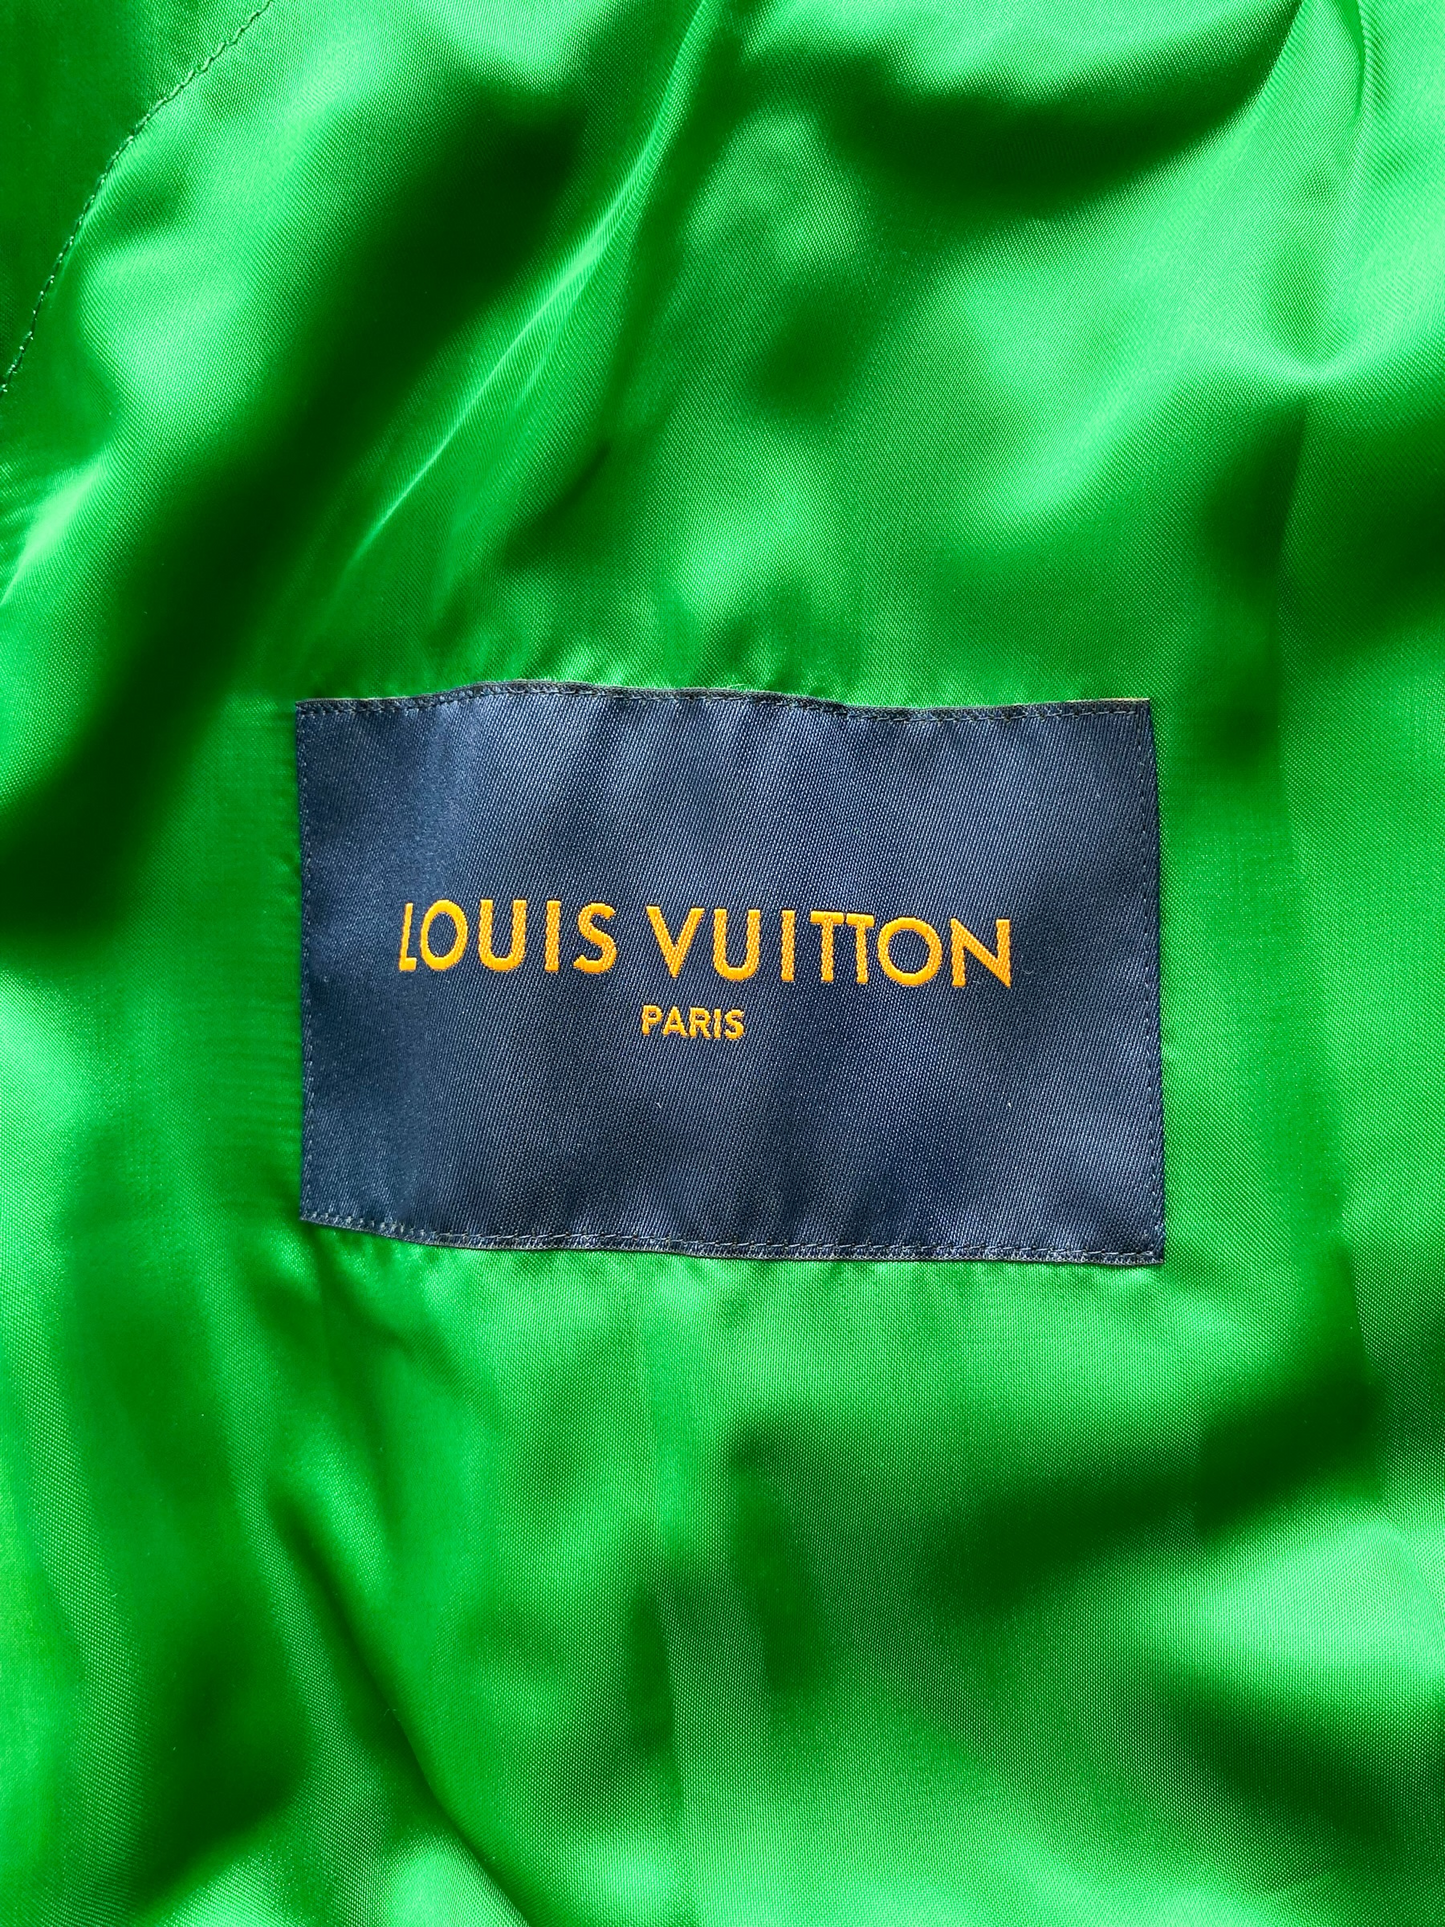 Louis Vuitton Green Varsity Leather Jacket for Sale in Federal Way